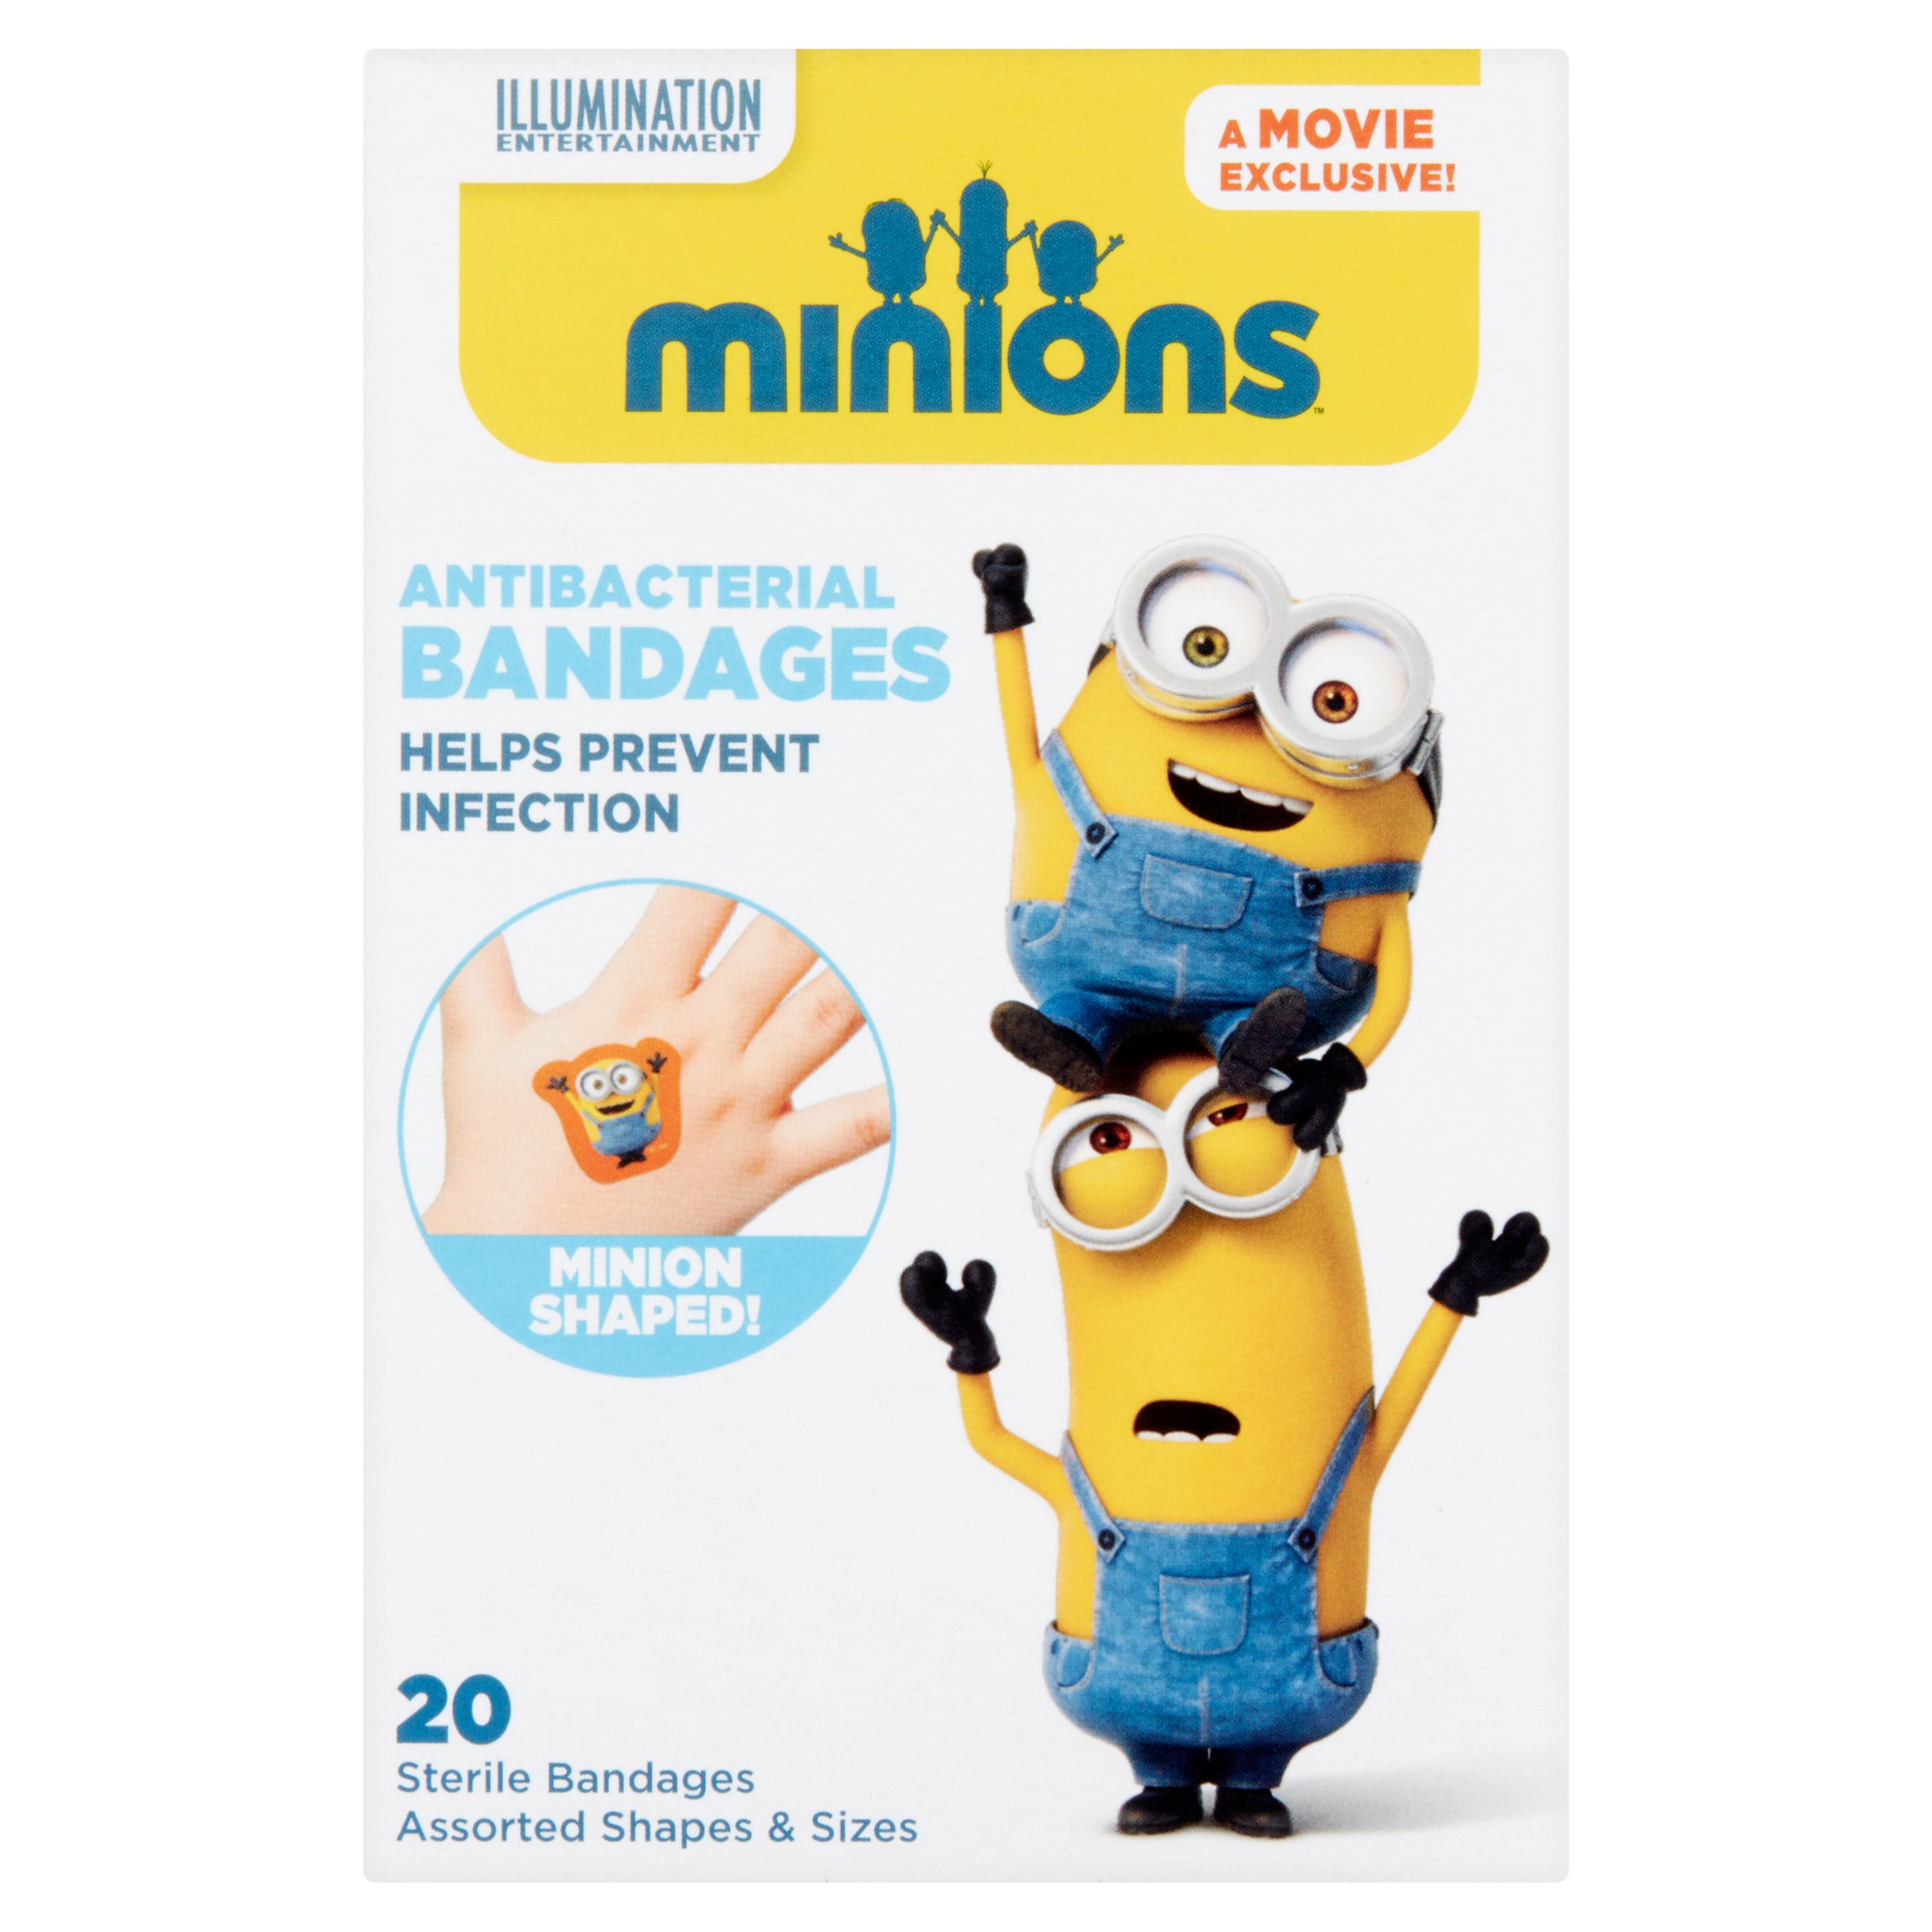 Minions Antibacterial Bandages Sterile Bandages, 20 count - image 1 of 4